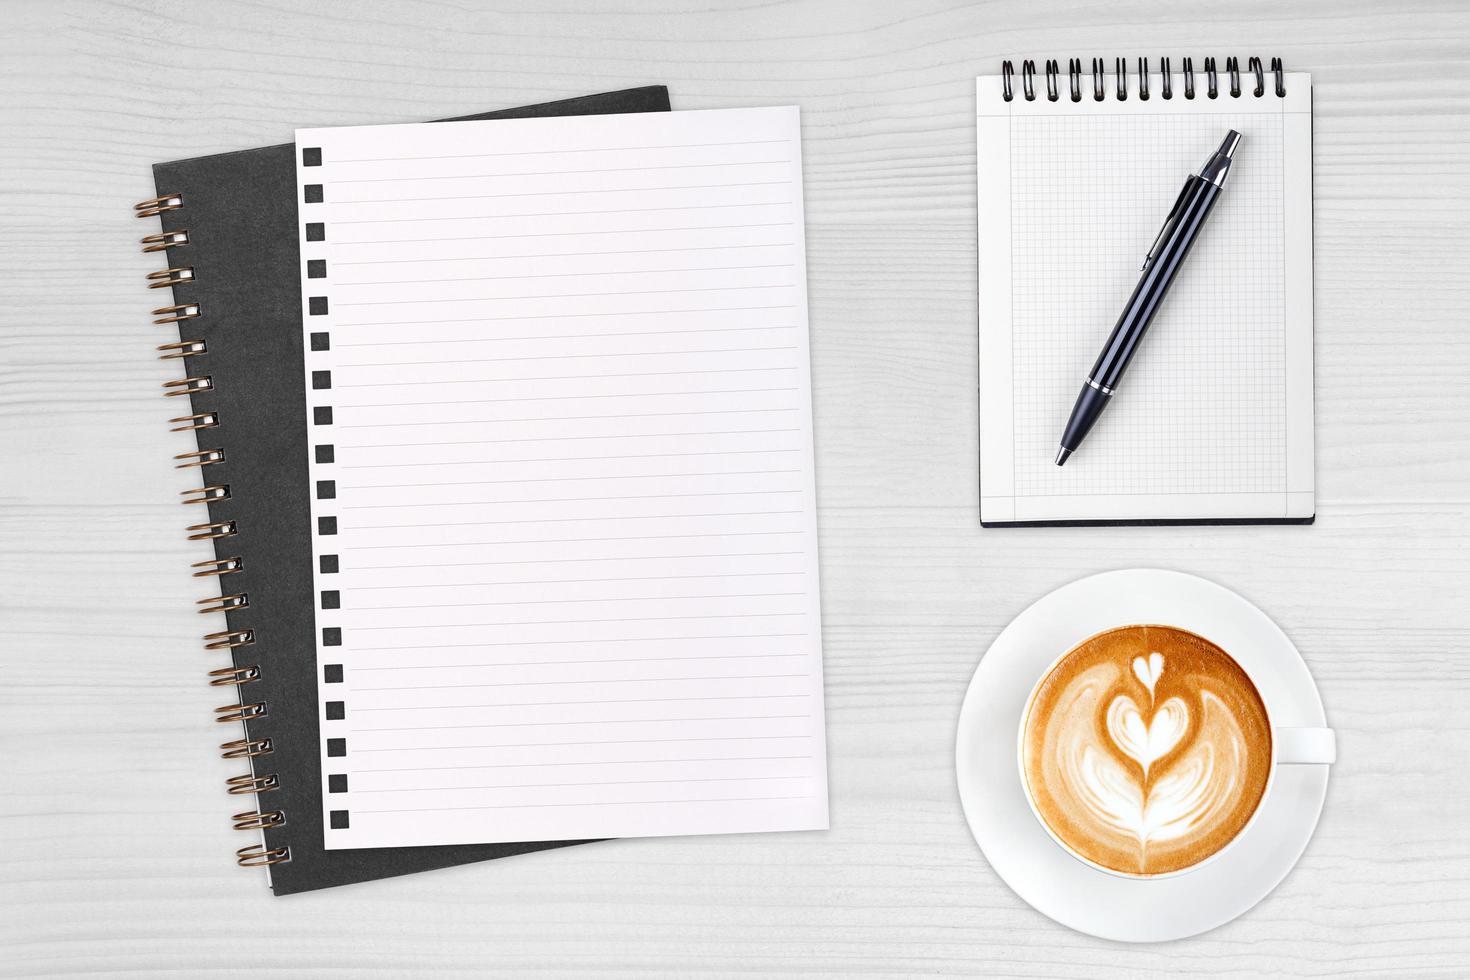 An open blank notebook with pencil and a cup of coffee on wooden table. Latte art coffee on top photo